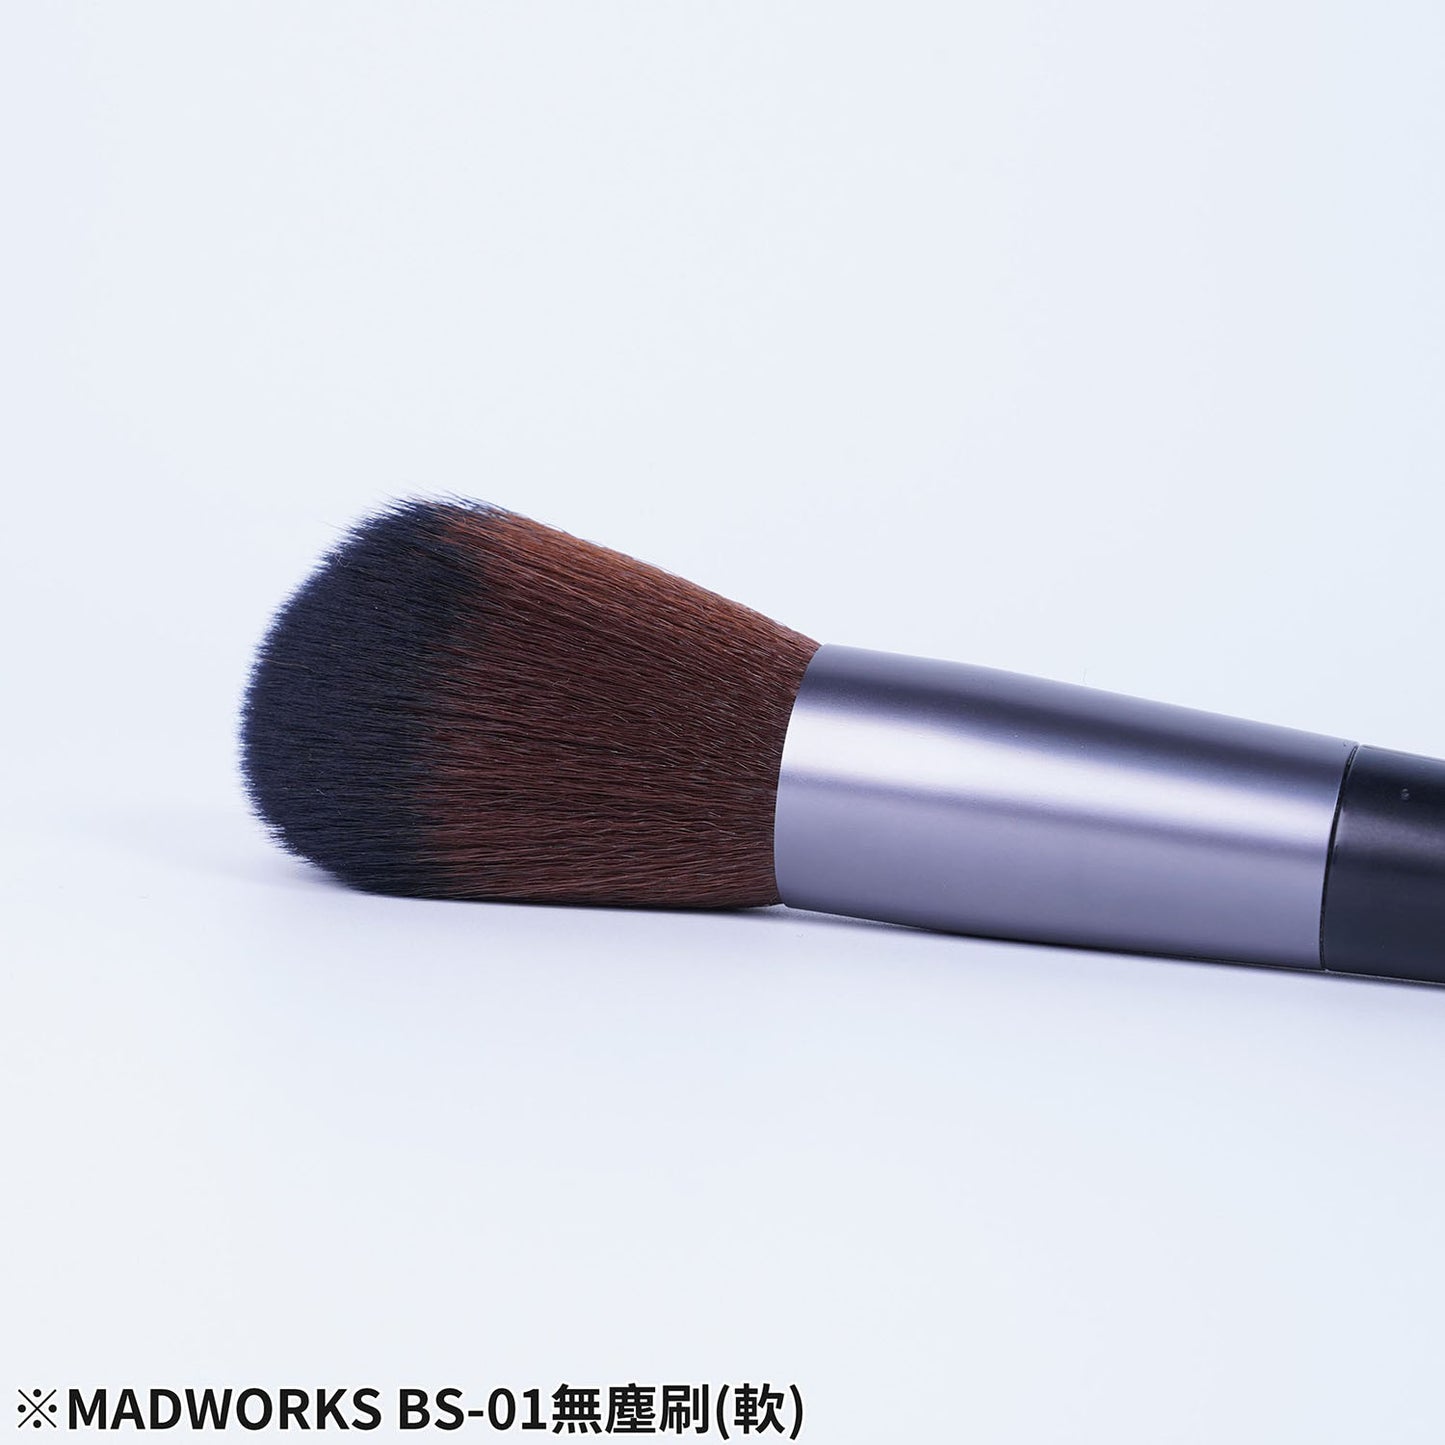 Madwork Dusting Brush / Cleaning Brush (BS01/BS02)